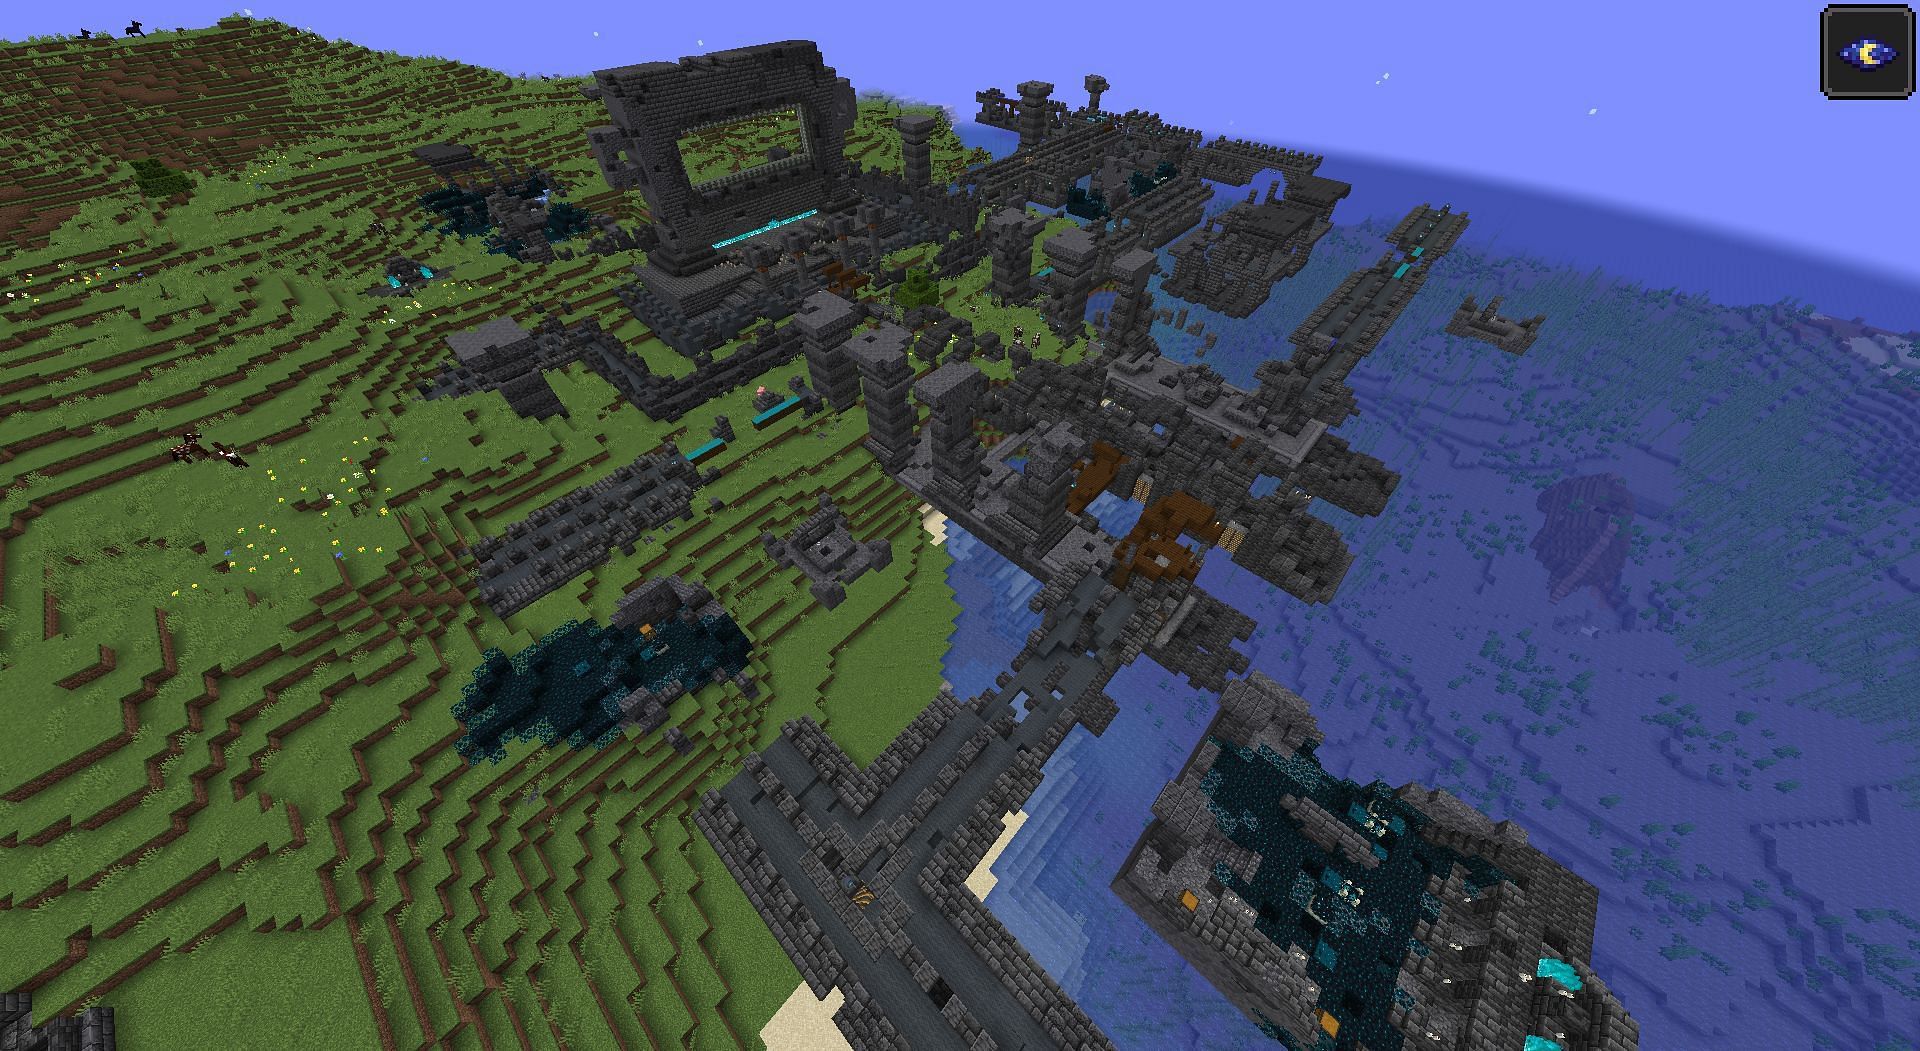 Complete Ancient City generated on the surface (Image via Minecraft snapshot 22w18a)